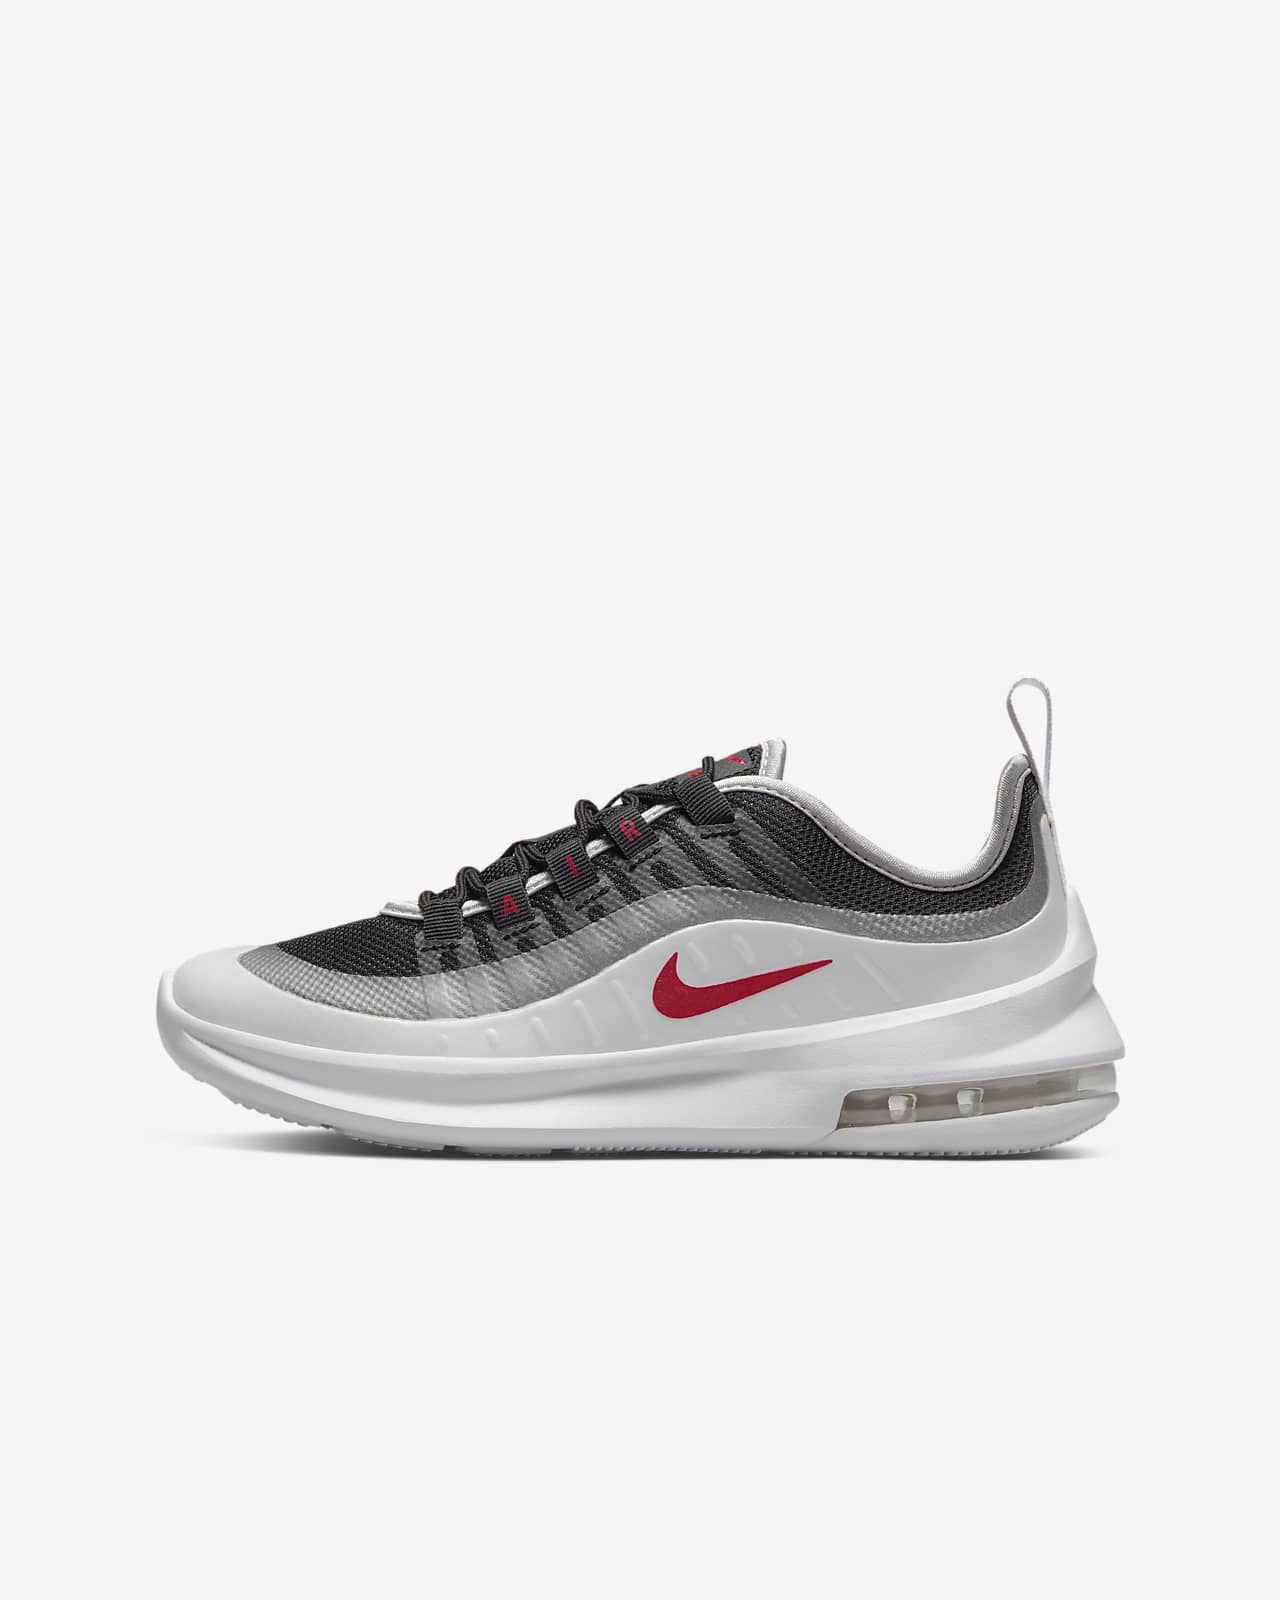 when did air max axis come out